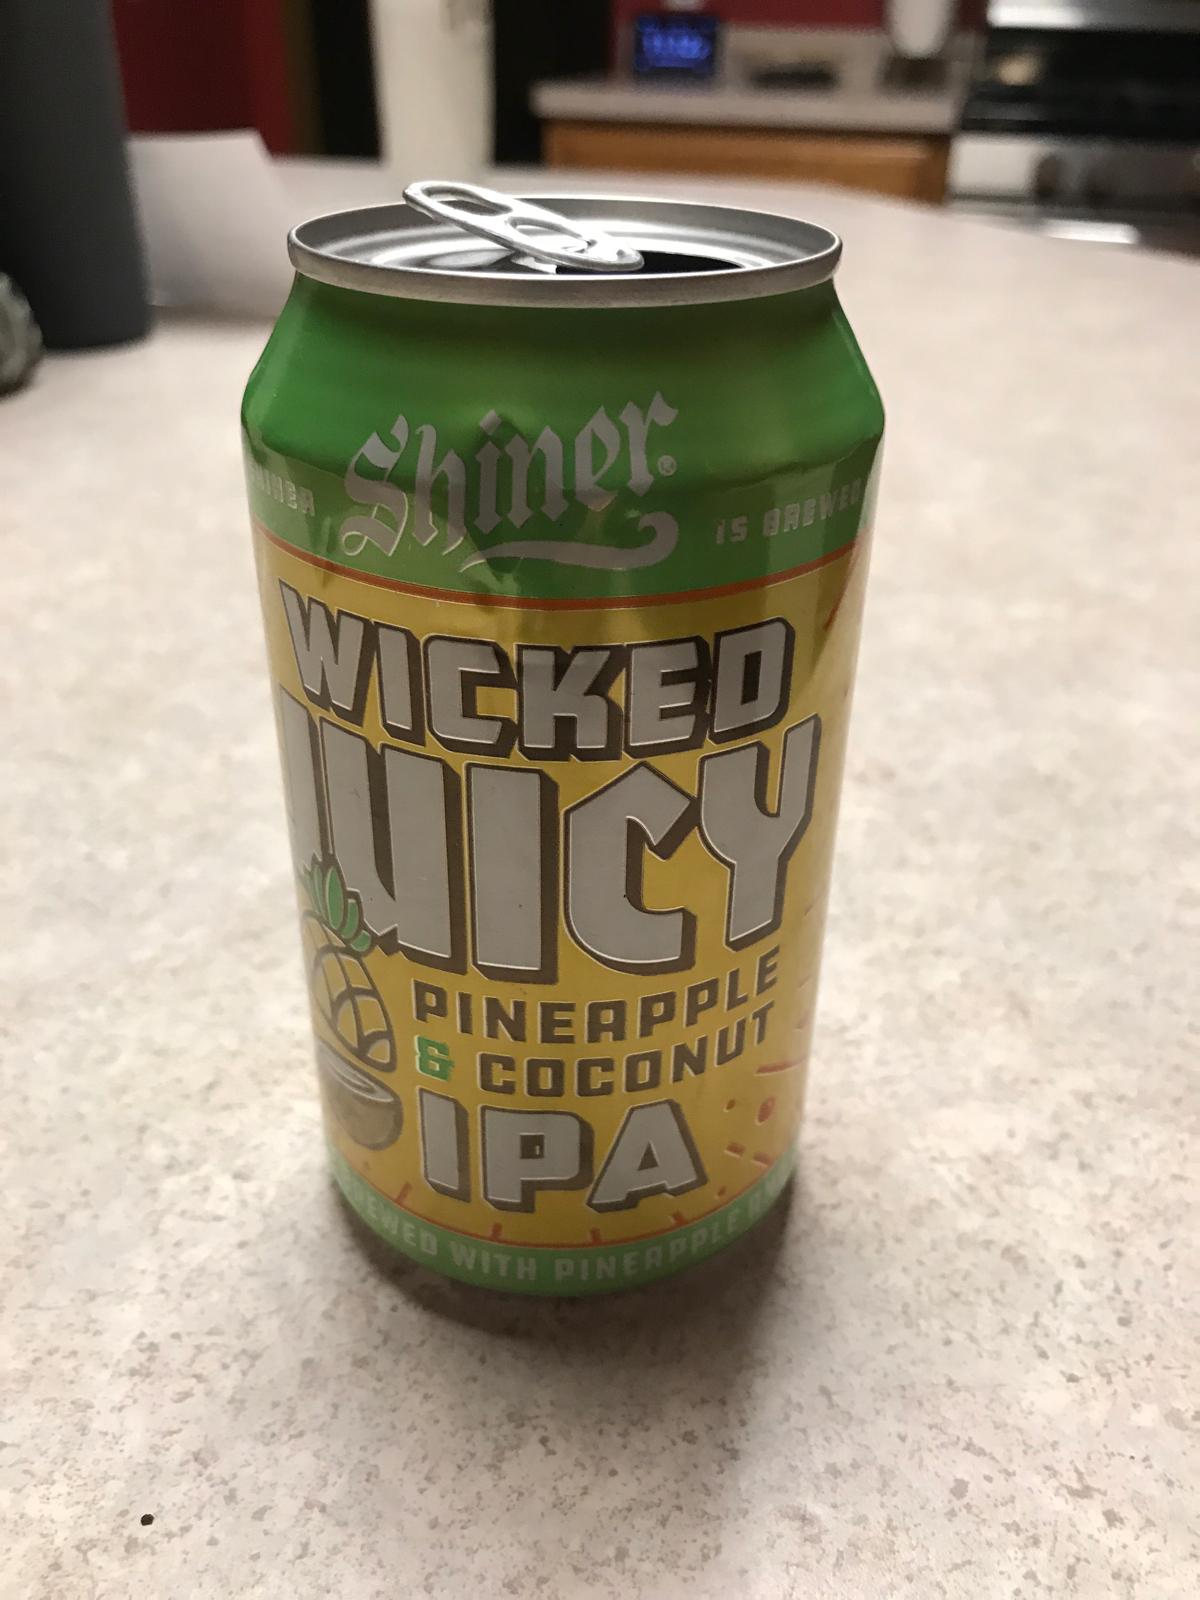 Wicked Juicy Pineapple And Coconut IPA